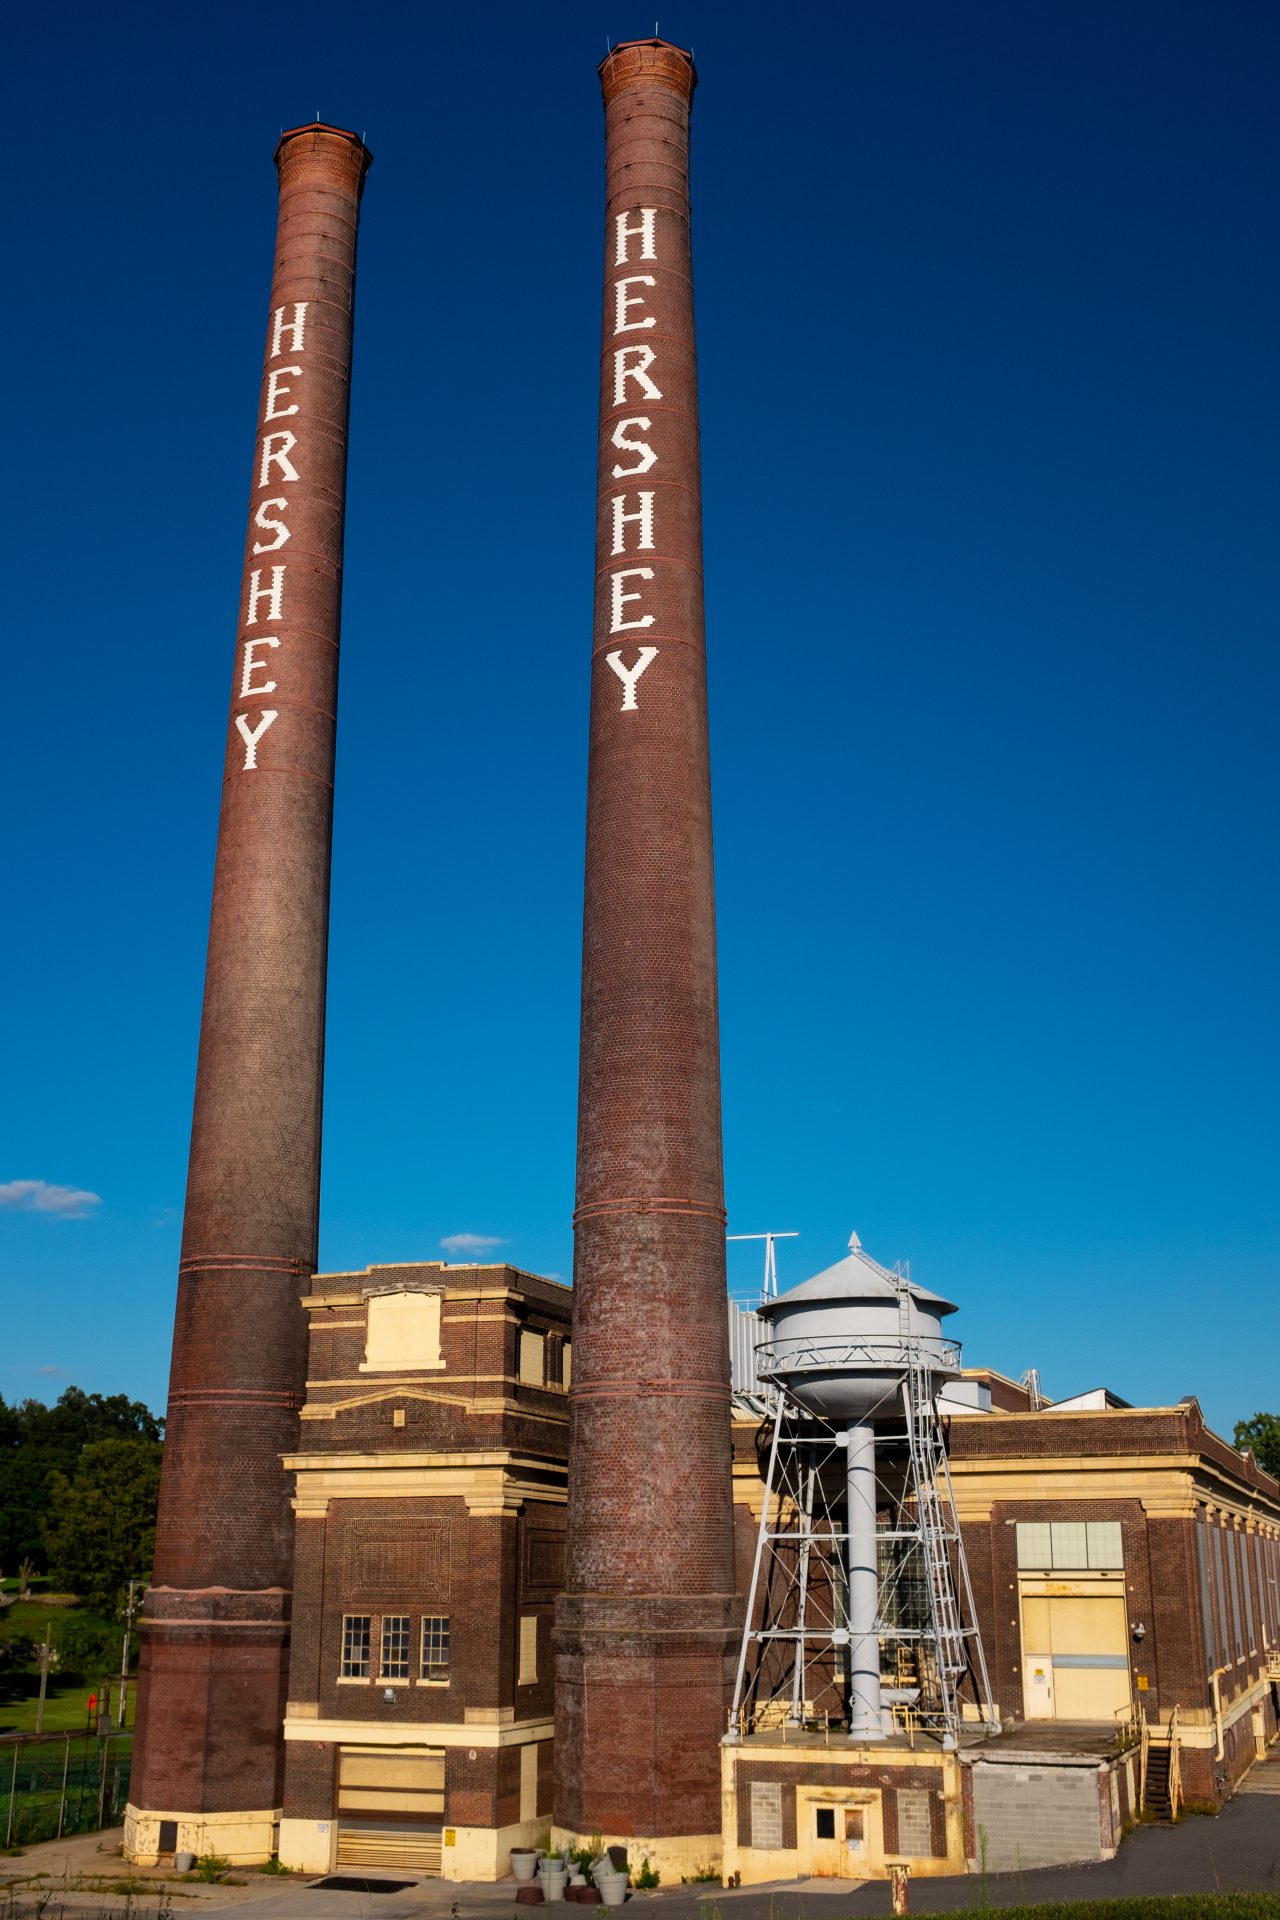 Two smokestacks stand at the old Hershey factory in Hershey, Pa., in September 2019.